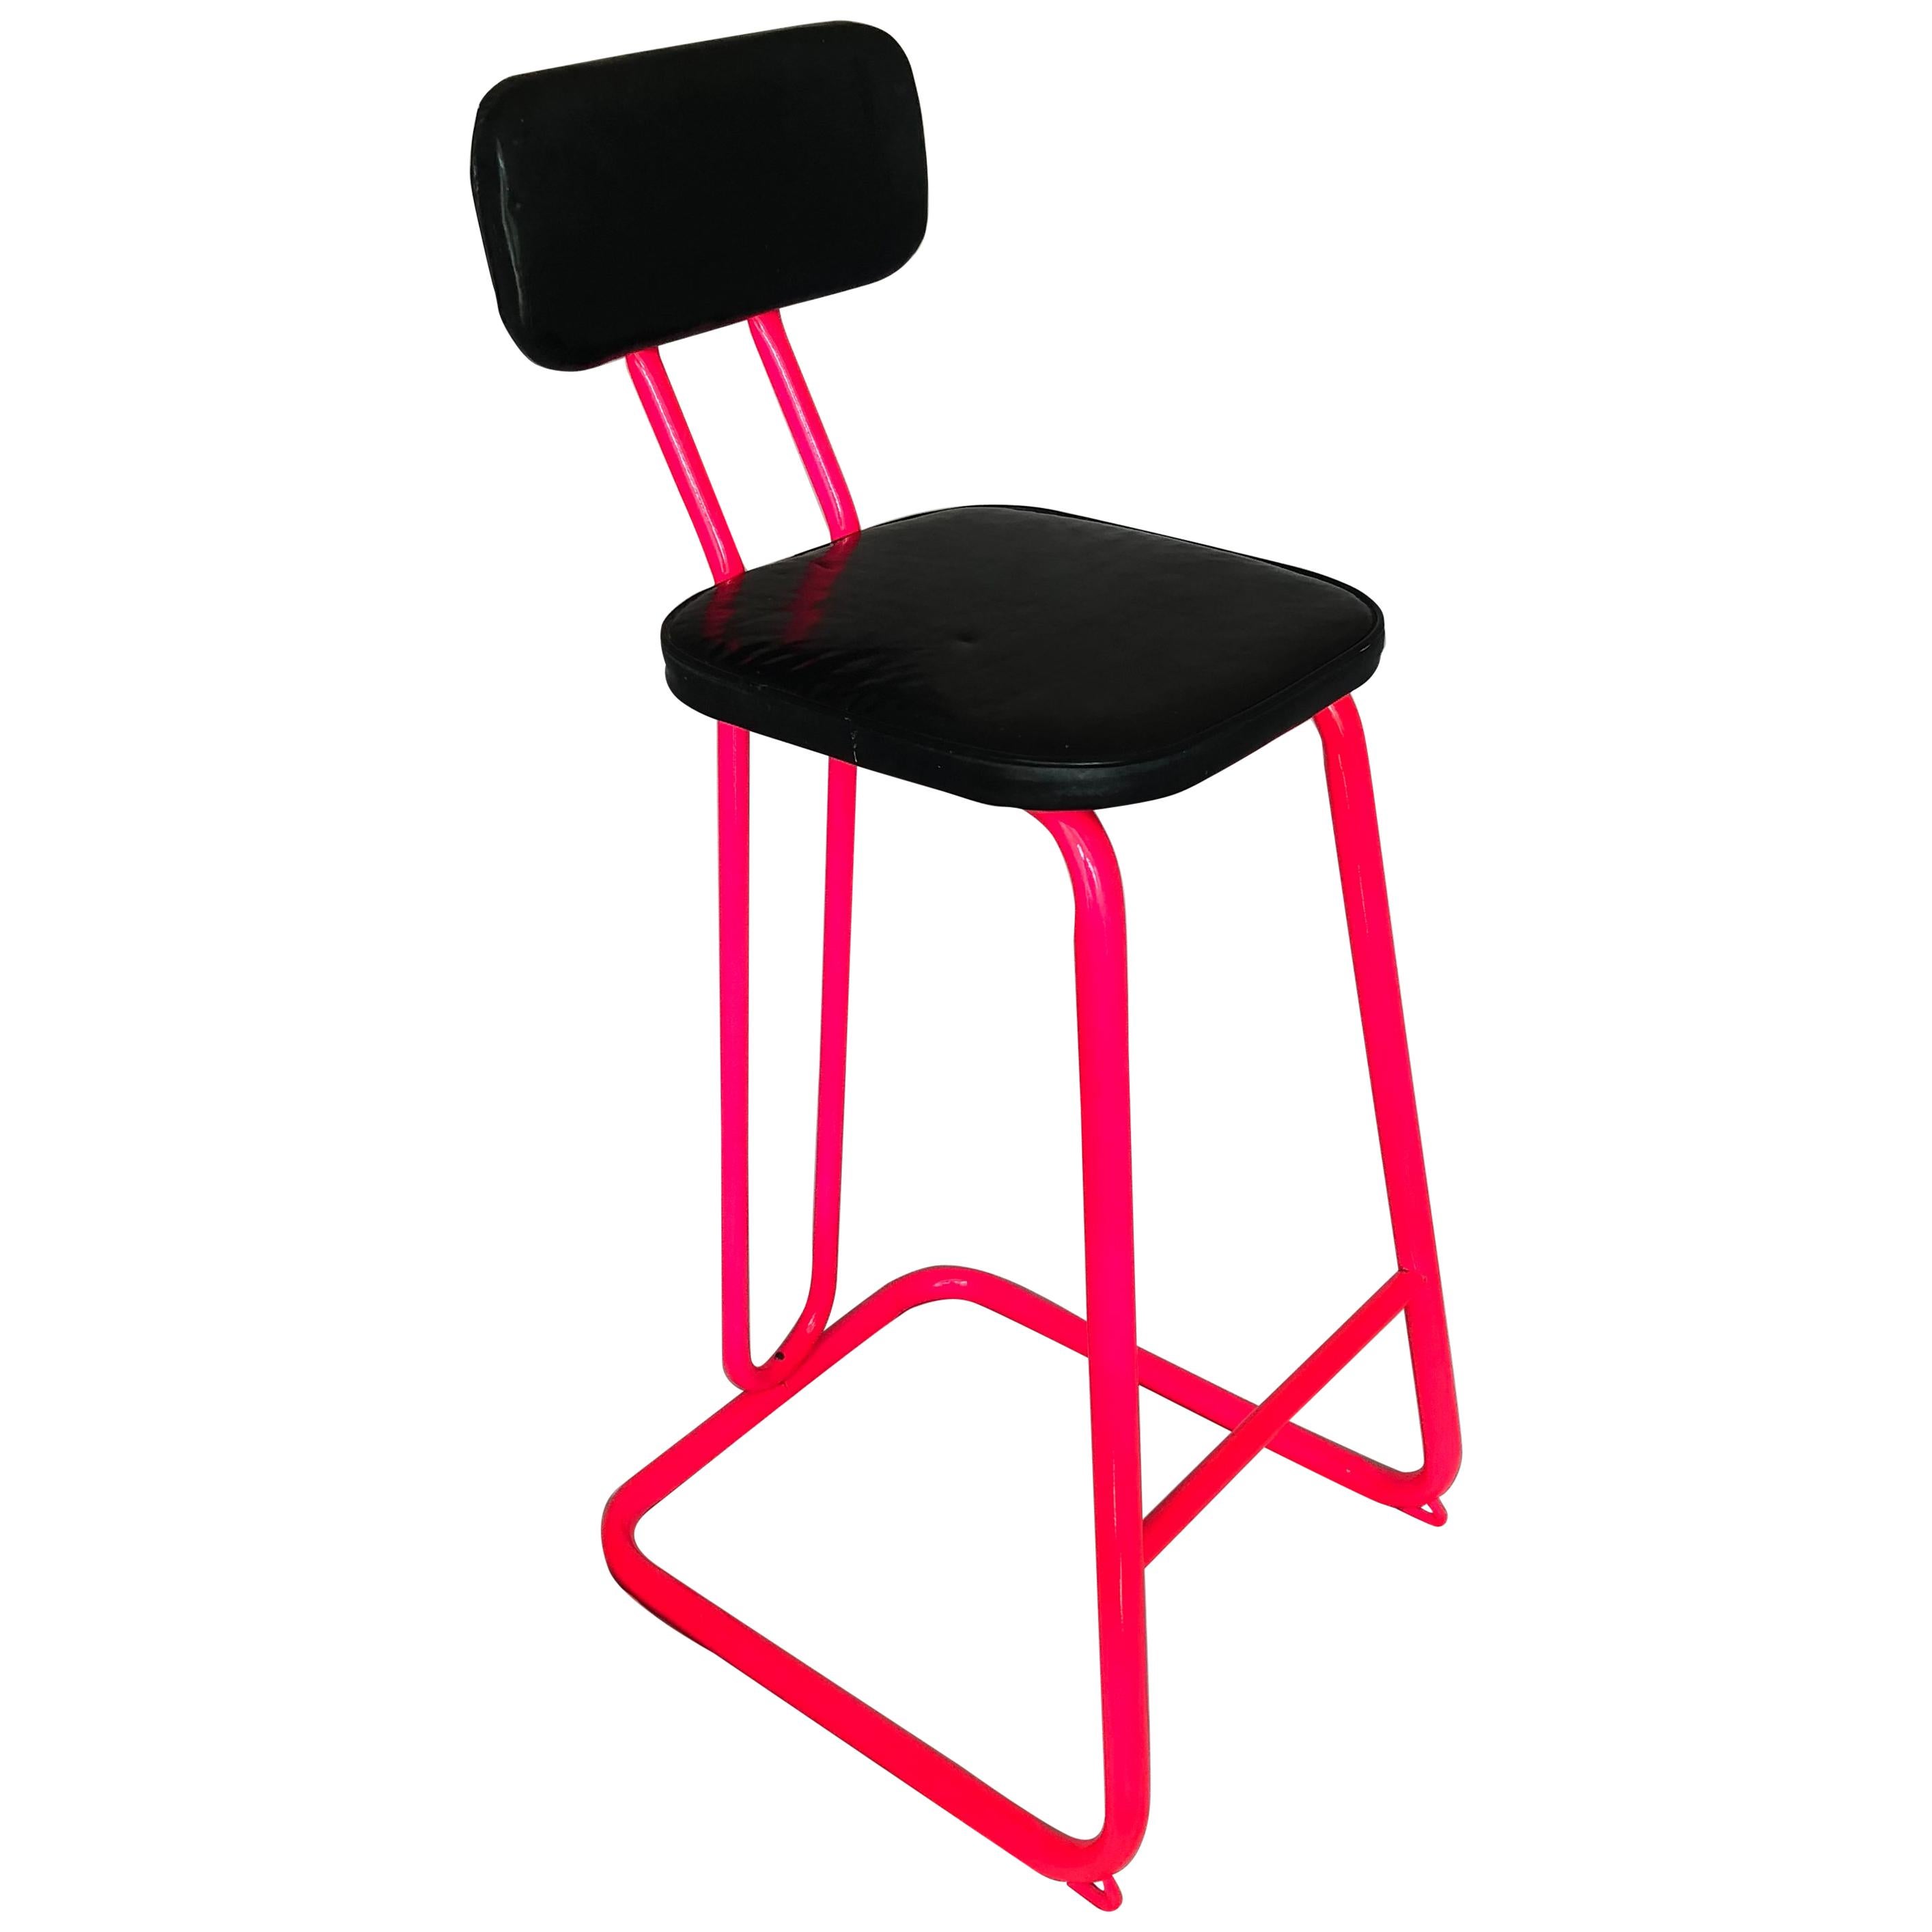 Mid-Century Modern bar stools by Daystrom.

Newly powder-coated in pink and simi-orange vintage MCM chrome bar stool in original black vinyl fabric, Marked DAYSTROM on the back.

   